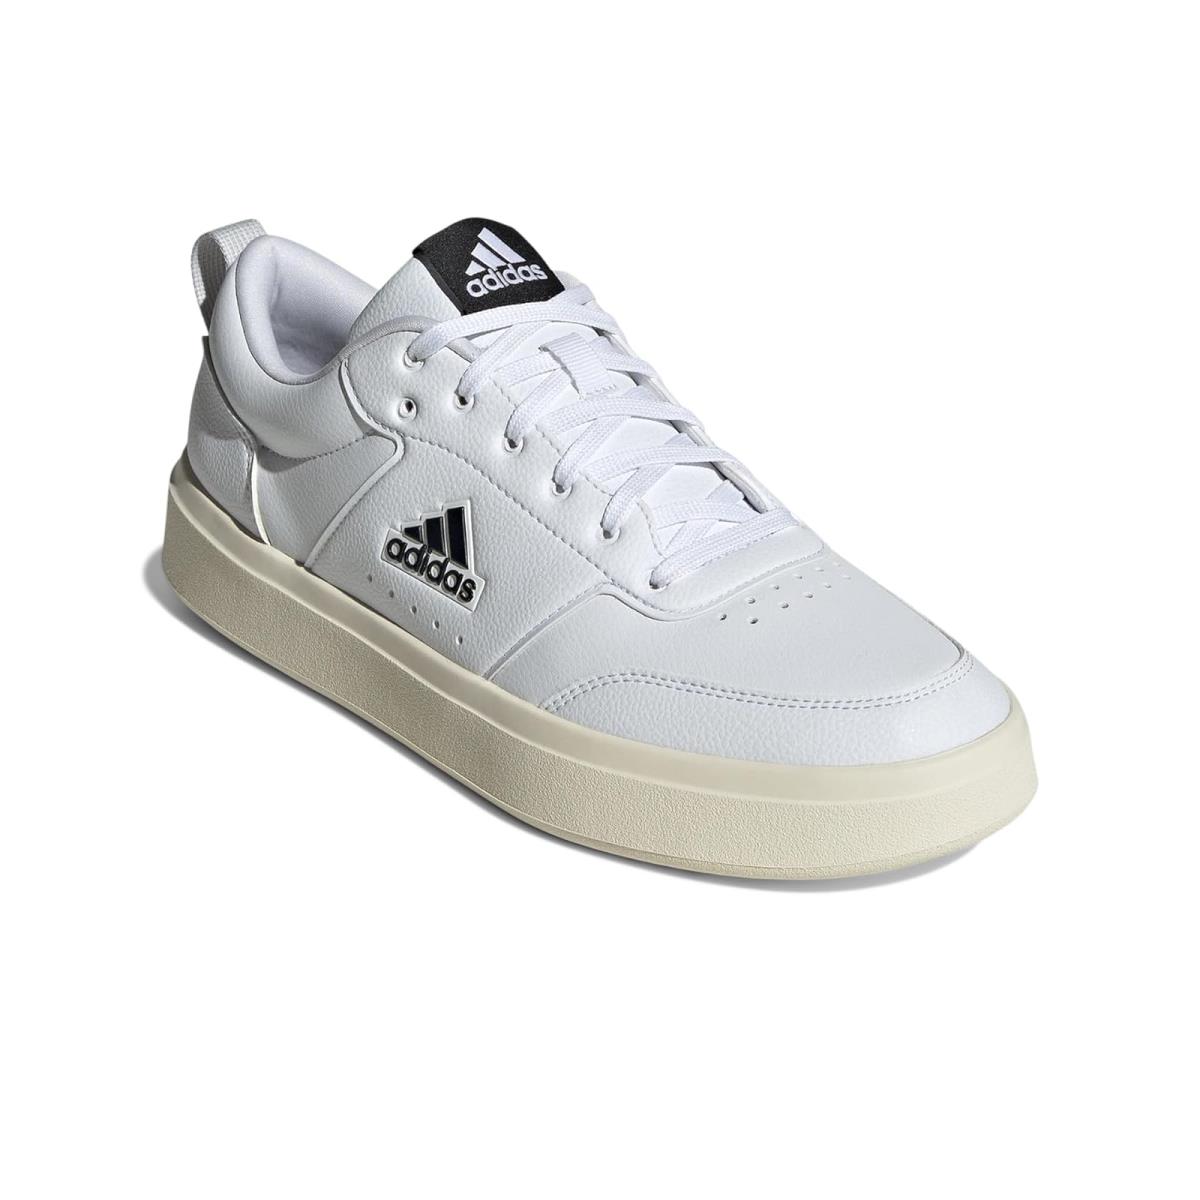 Man`s Sneakers Athletic Shoes Adidas Park ST White/Black/Off-White